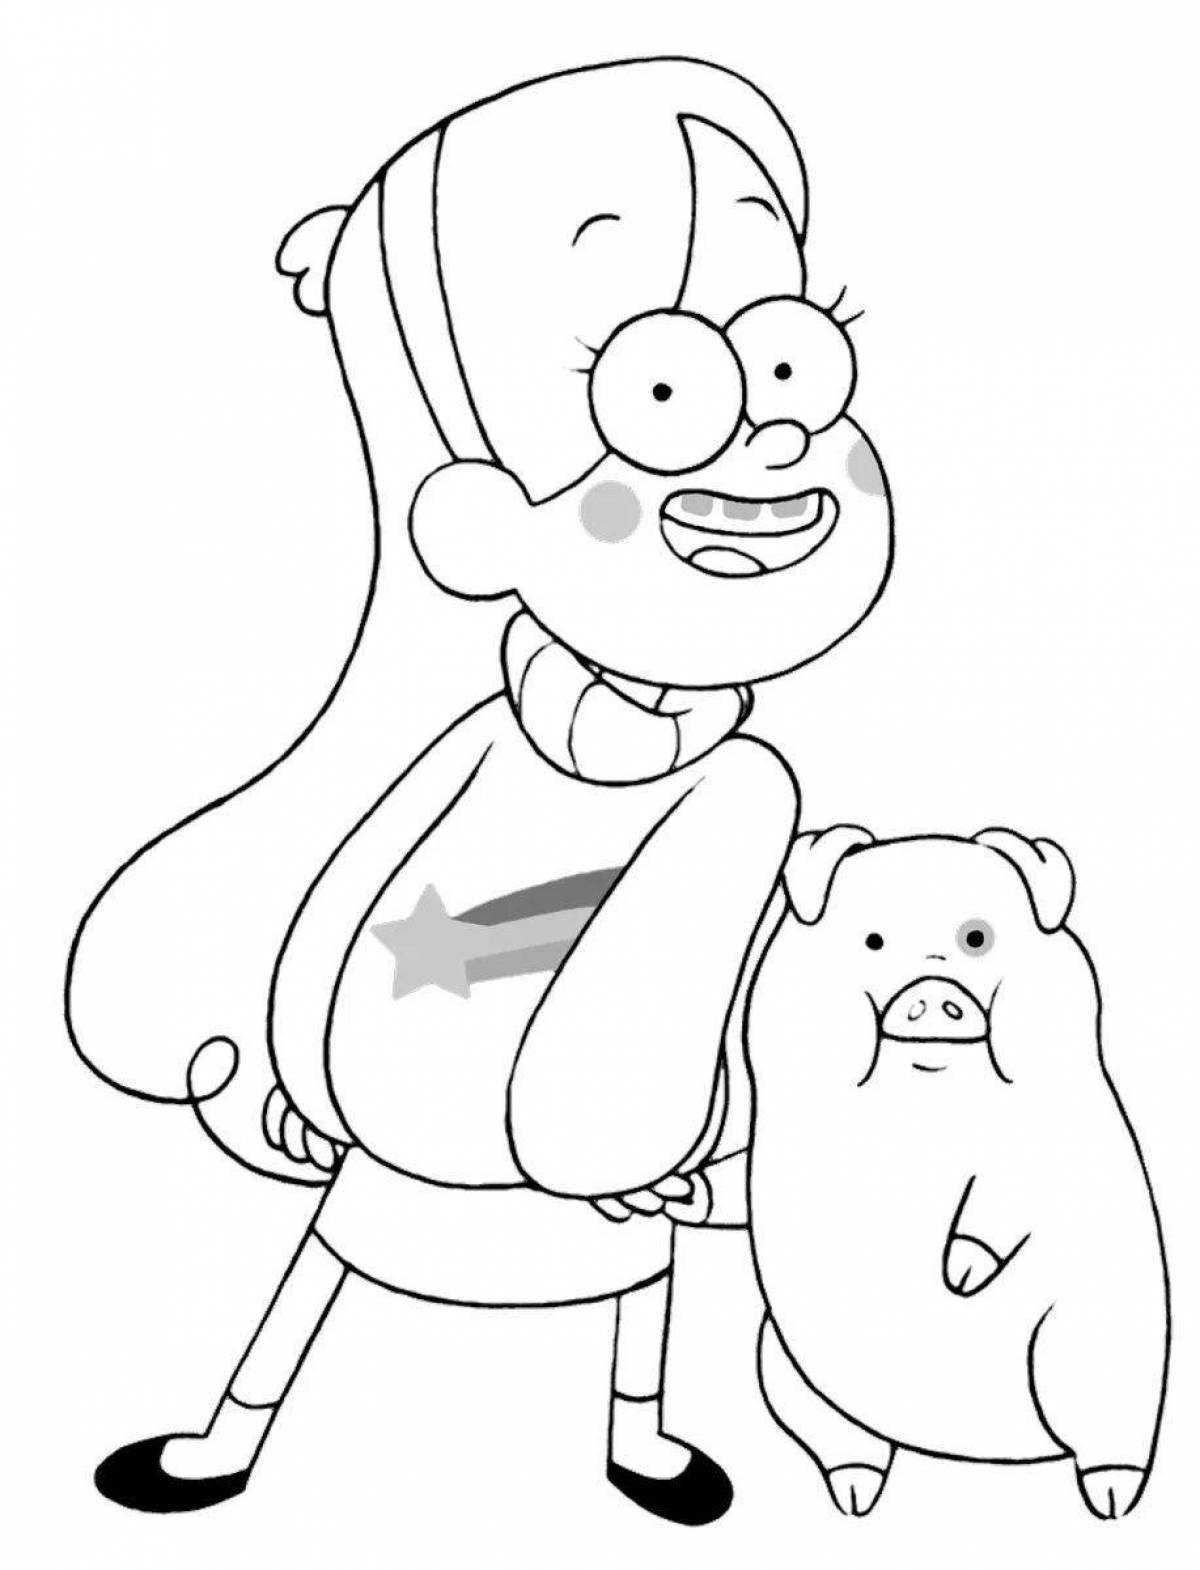 Mabel and chubby coloring book